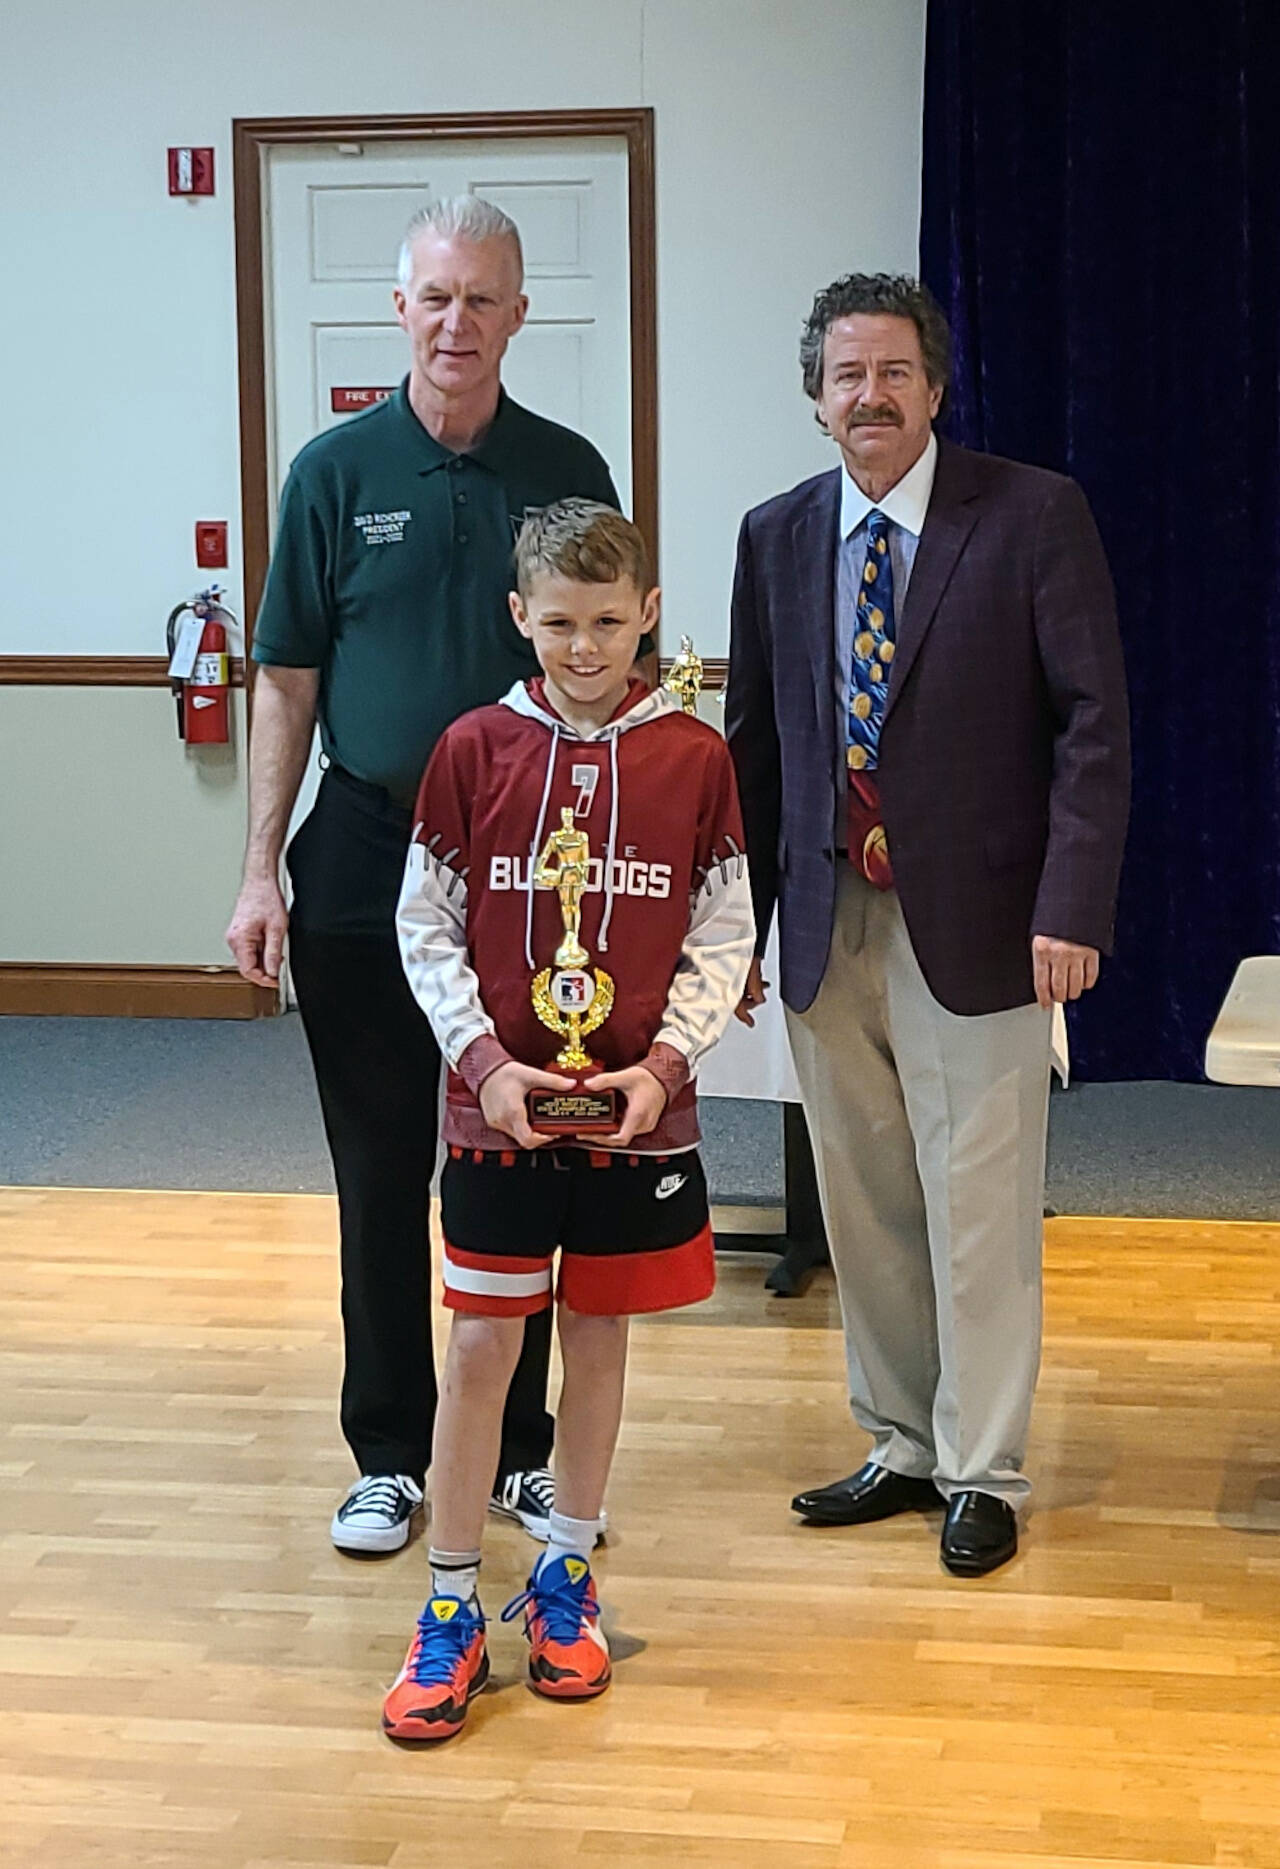 SUBMITTED PHOTO Lawyer Niemi of Montesano won the state championship of the Elks Hoop Shoot Saturday at St. Martin’s University in Lacey after sinking 21-of-25 shots in the boys 8-9 year-old competition. Niemi is flanked by WA Elks Association President Dave Richcreek, left, and Washington Hoop Shoot Director Joe Basil.